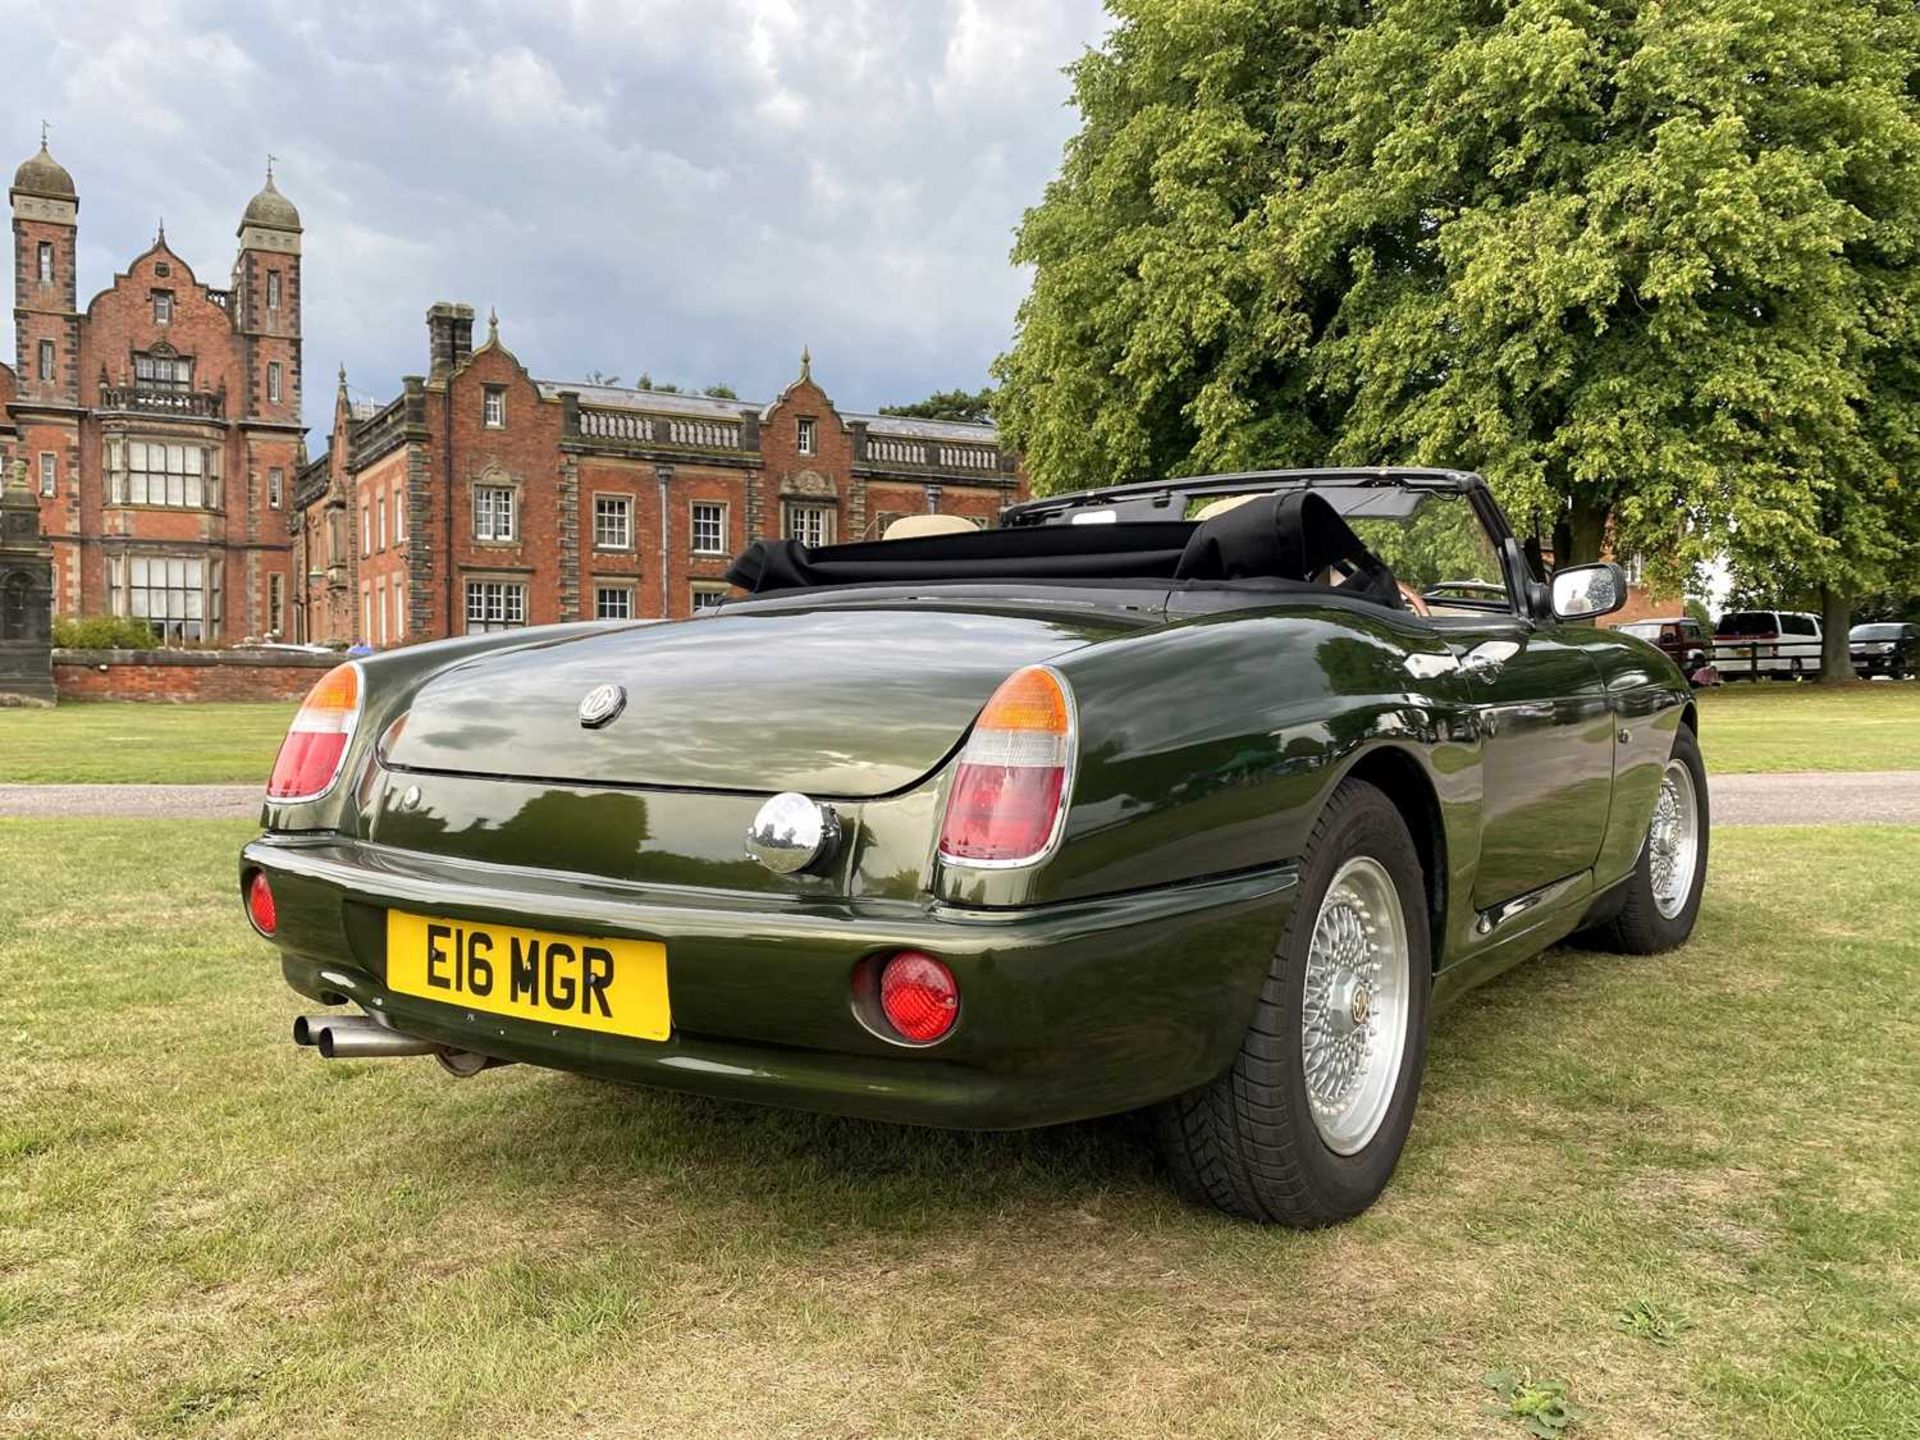 1995 MG RV8 A rare and sought-after car fitted with power steering - Image 17 of 45